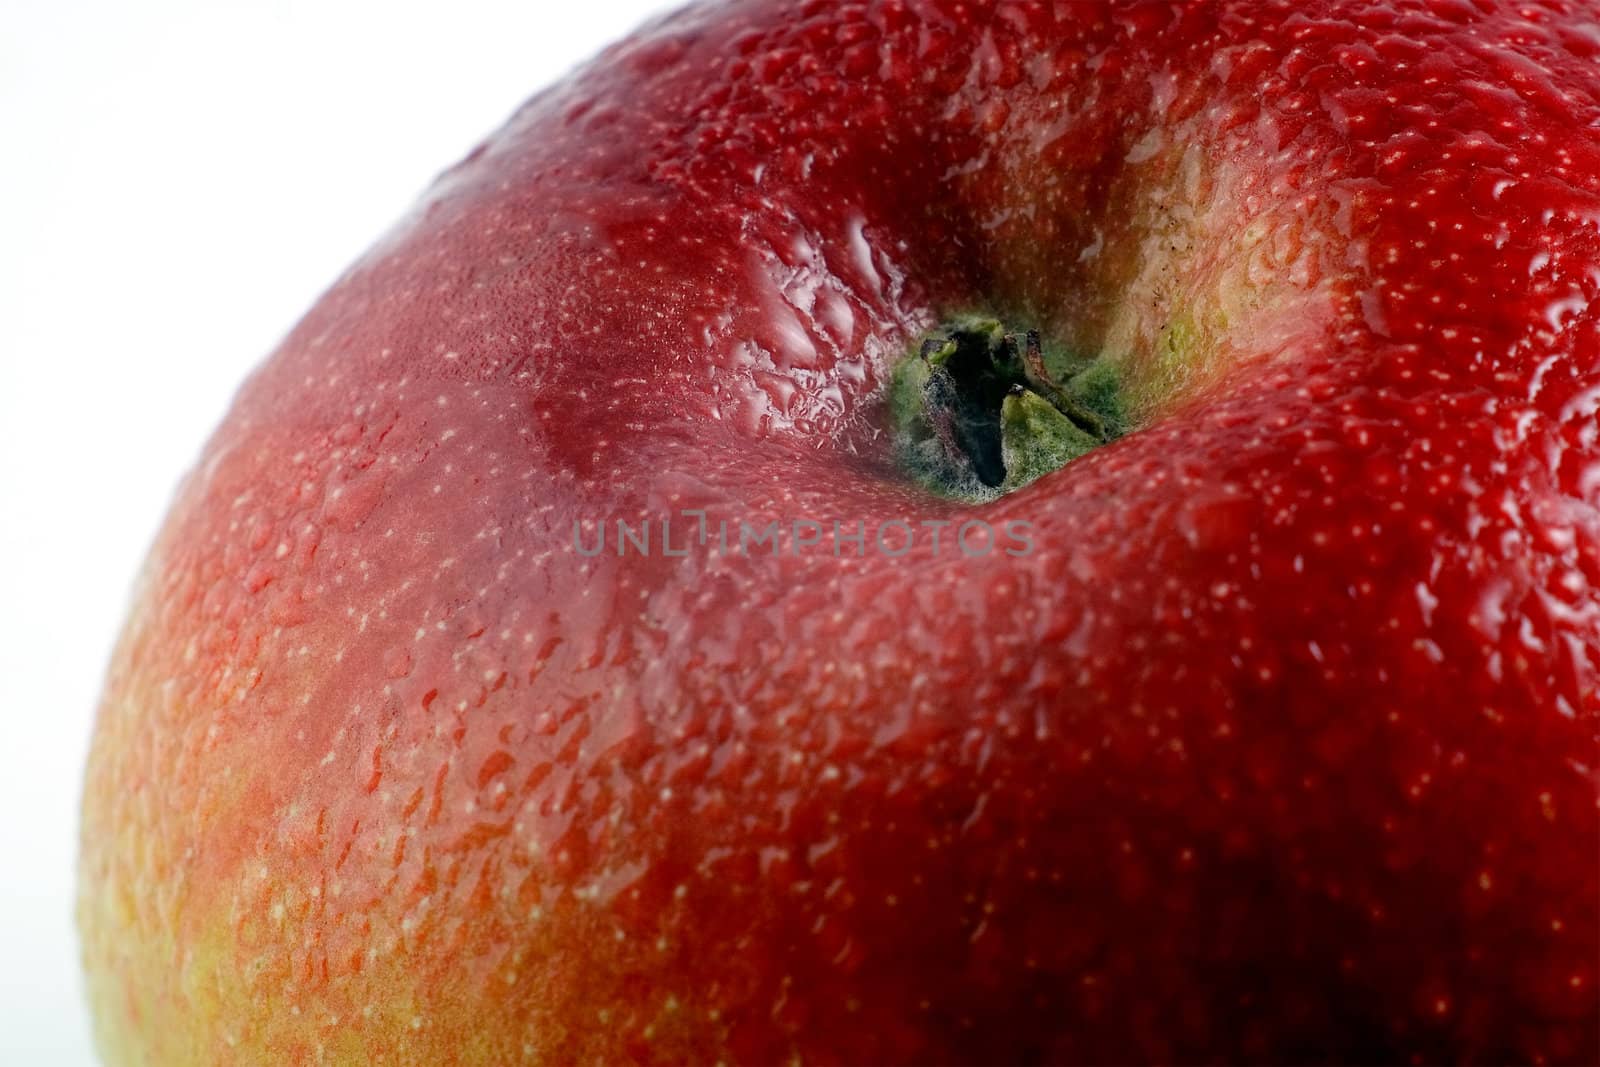 Apple on white background. Isolated object. Close-up.